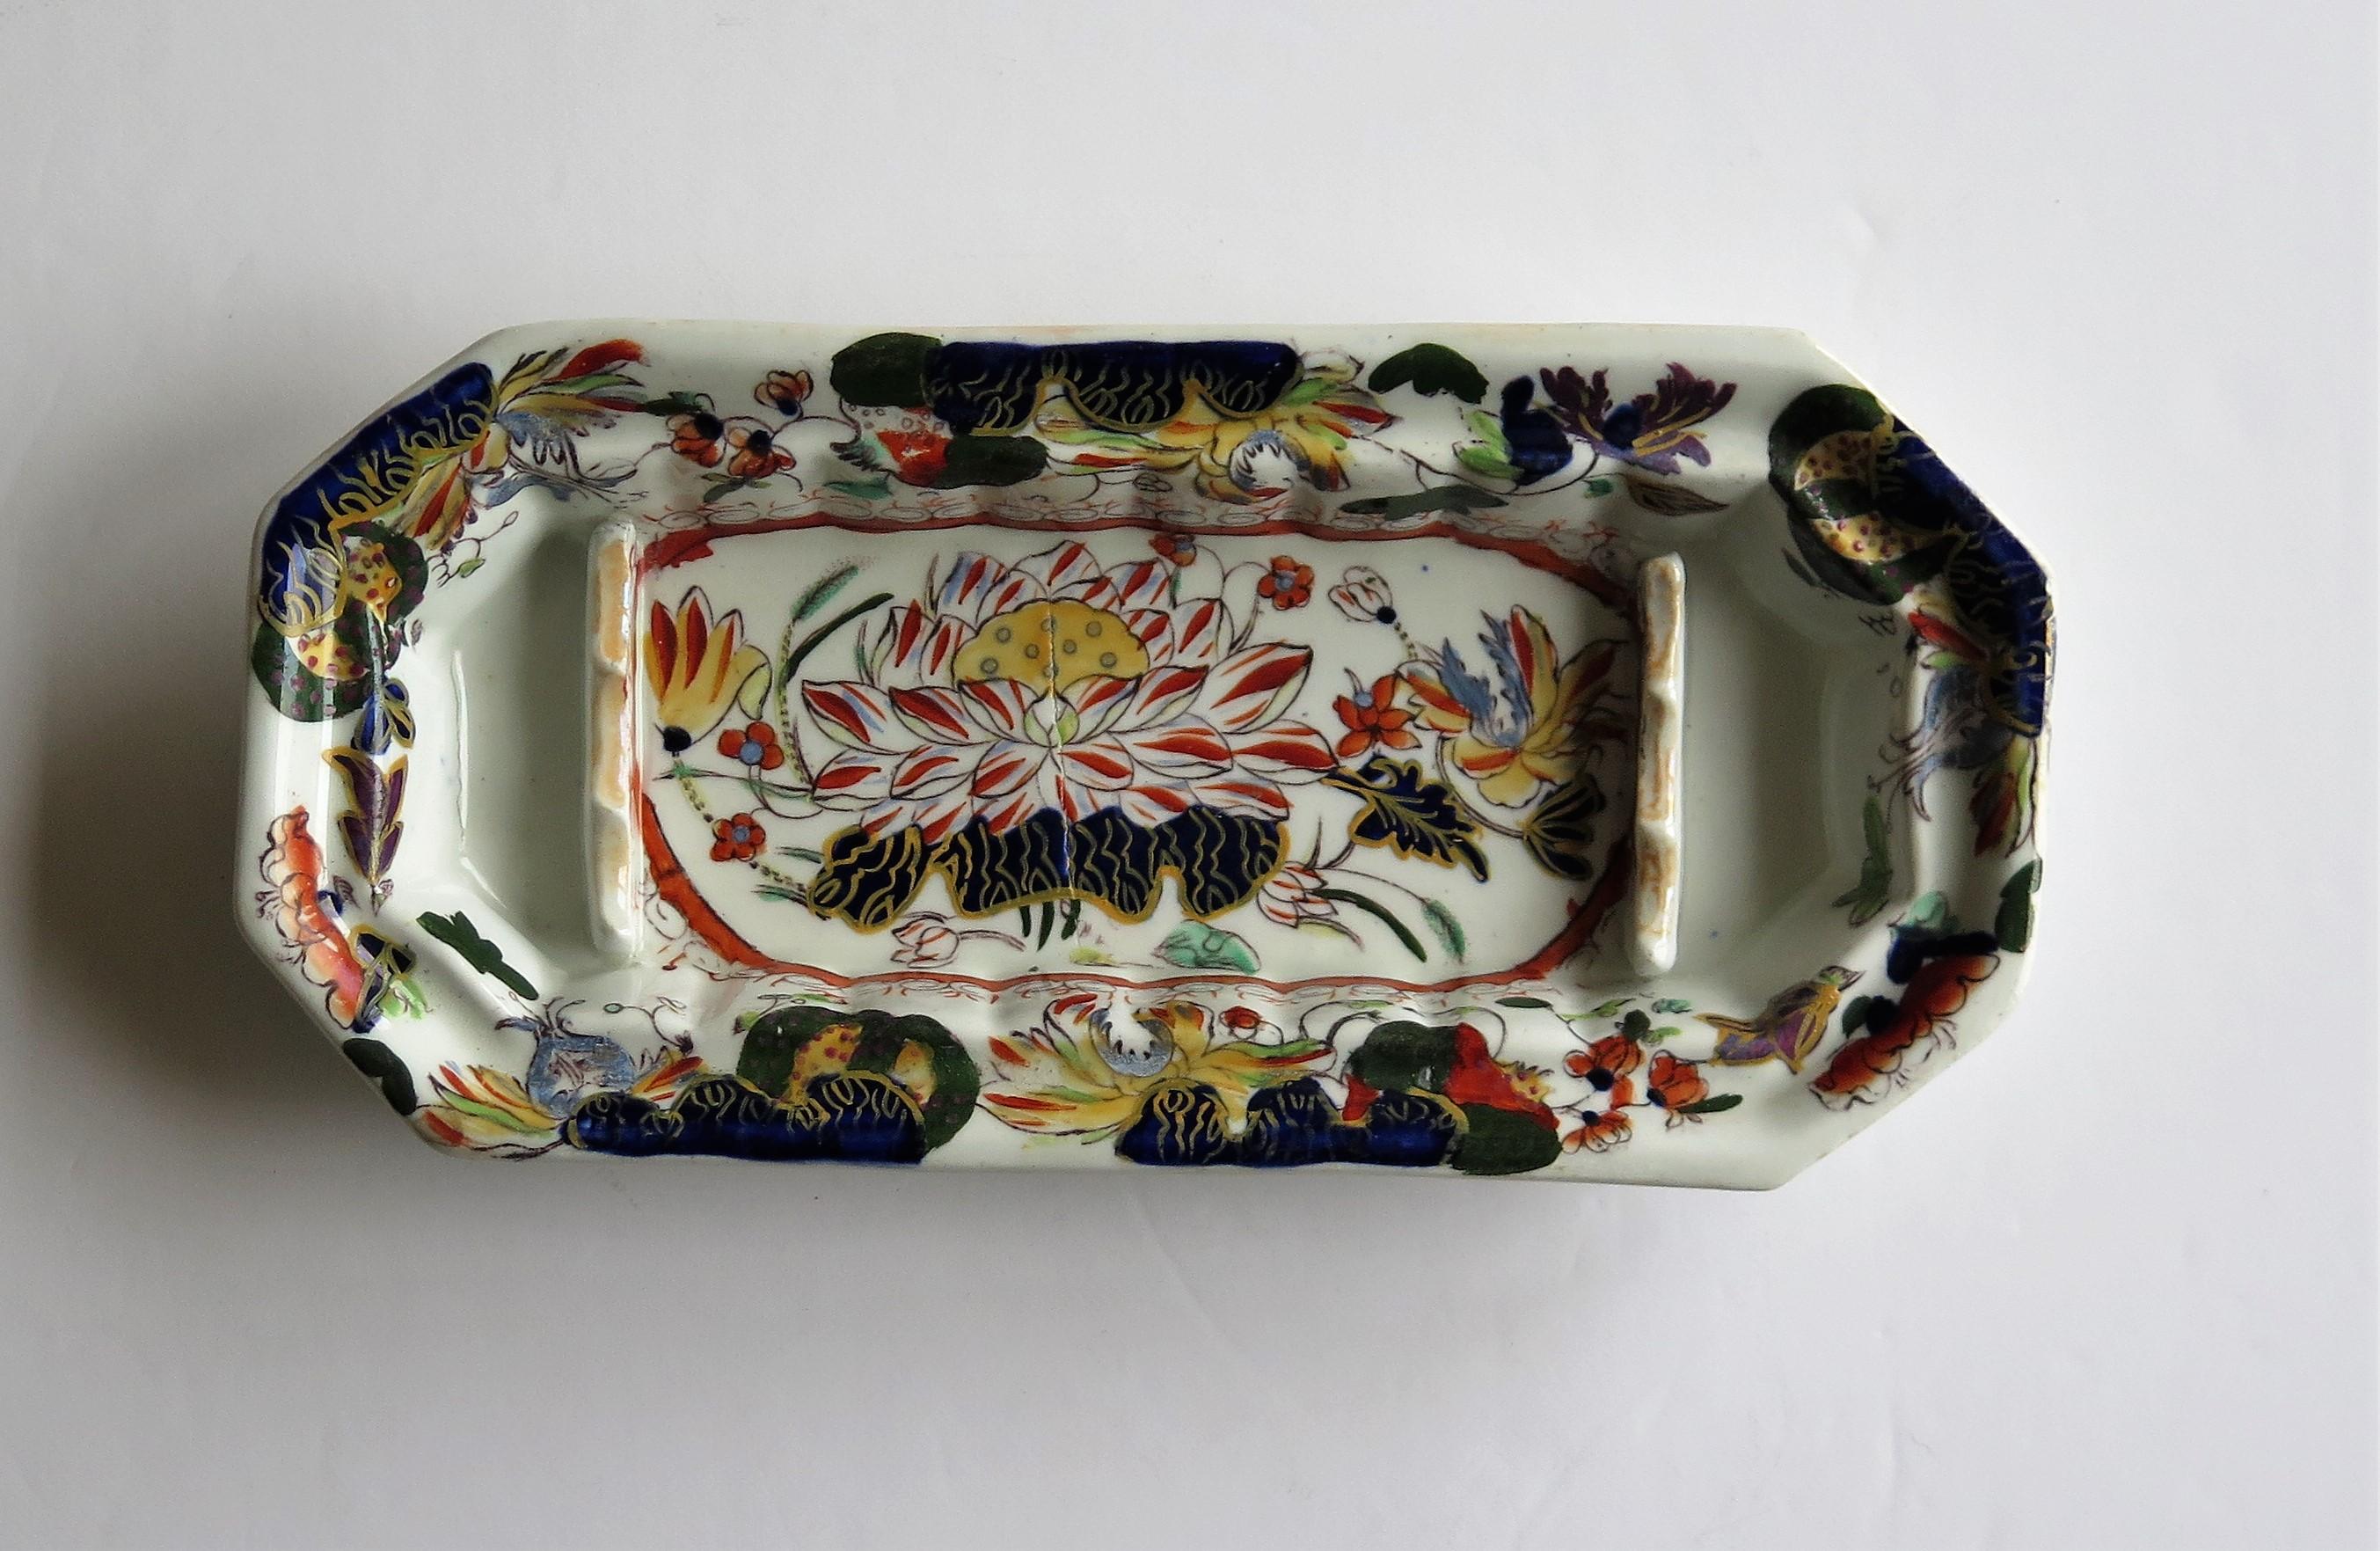 This is a good early Mason's Ironstone pottery pen tray or dish in the very decorative water lily pattern, produced by the Mason's factory at Lane Delph, Staffordshire, England, circa 1830.

Mason's pen trays are rare items and not many survived